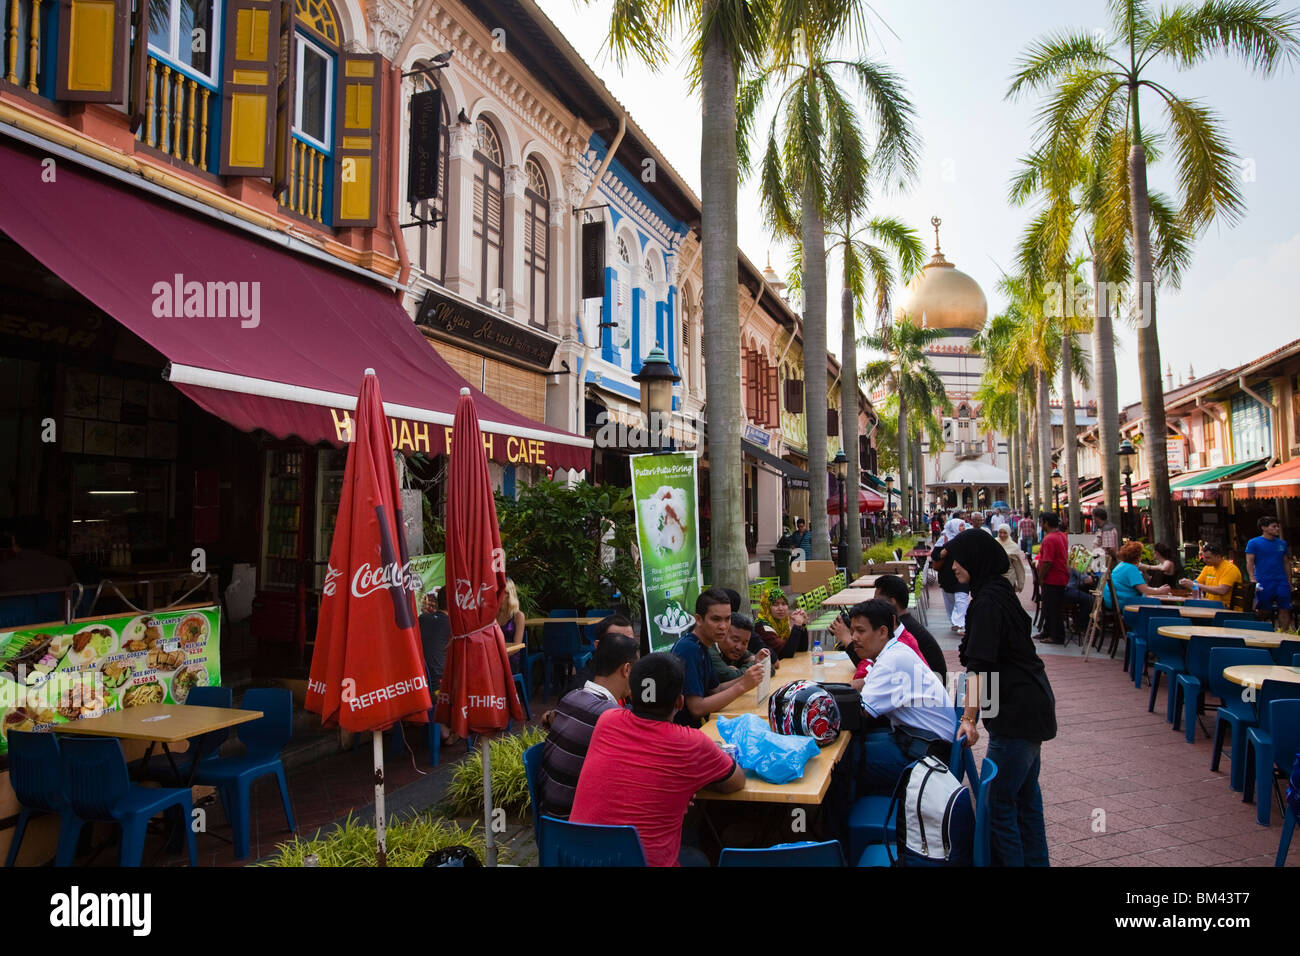 View along Bussorah Mall in the Muslim quarter of Kampong Glam, Singapore Stock Photo